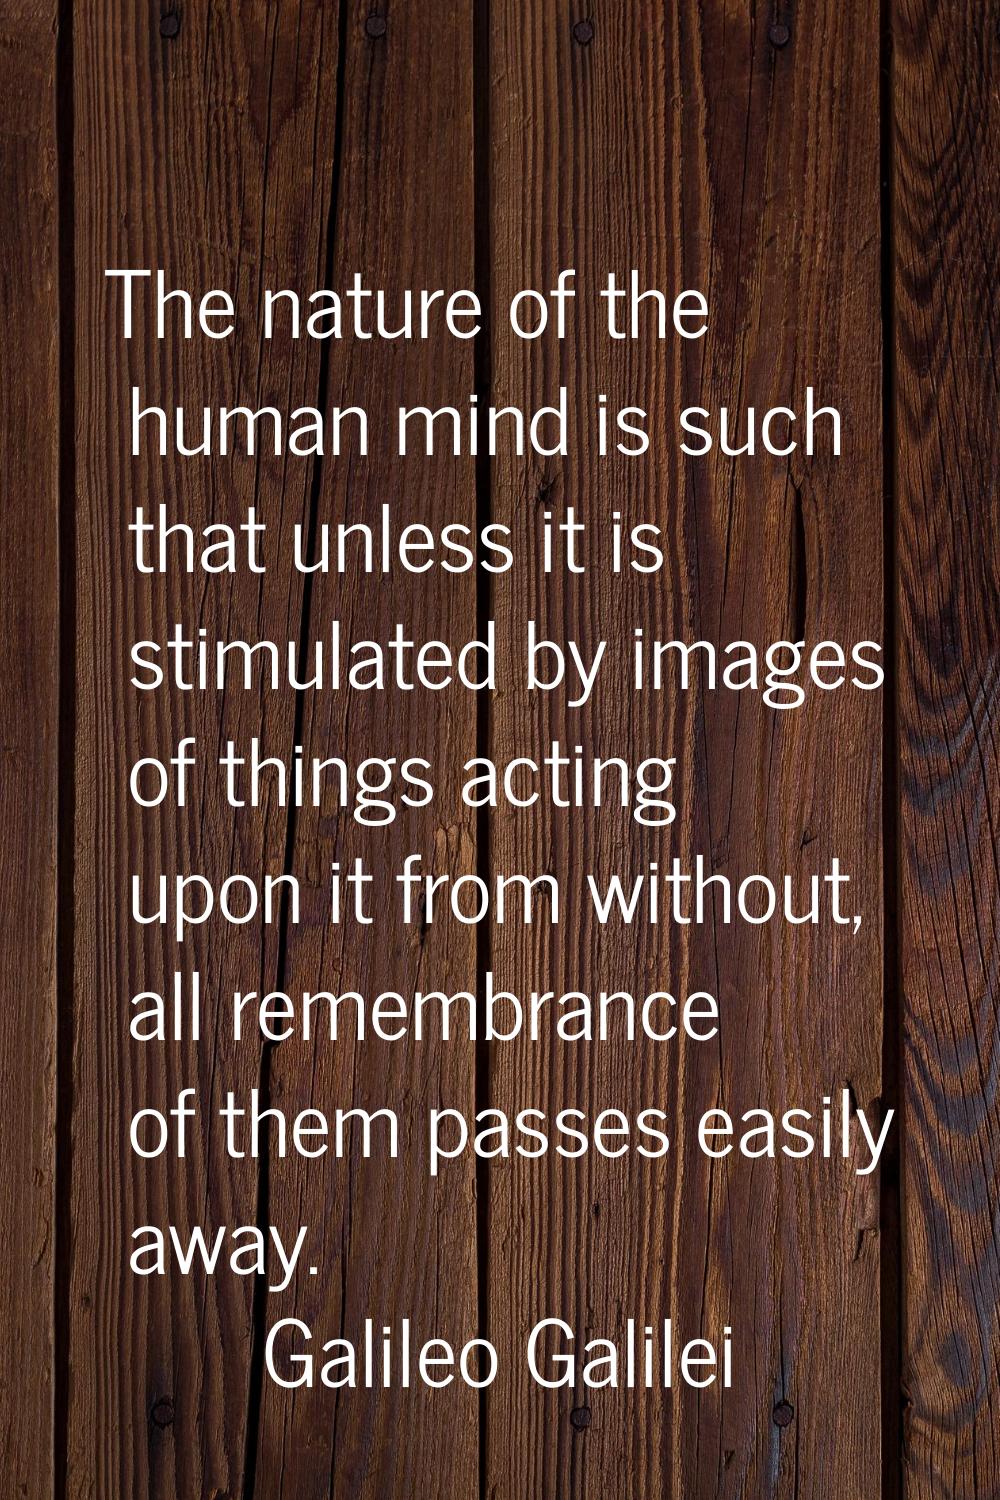 The nature of the human mind is such that unless it is stimulated by images of things acting upon i